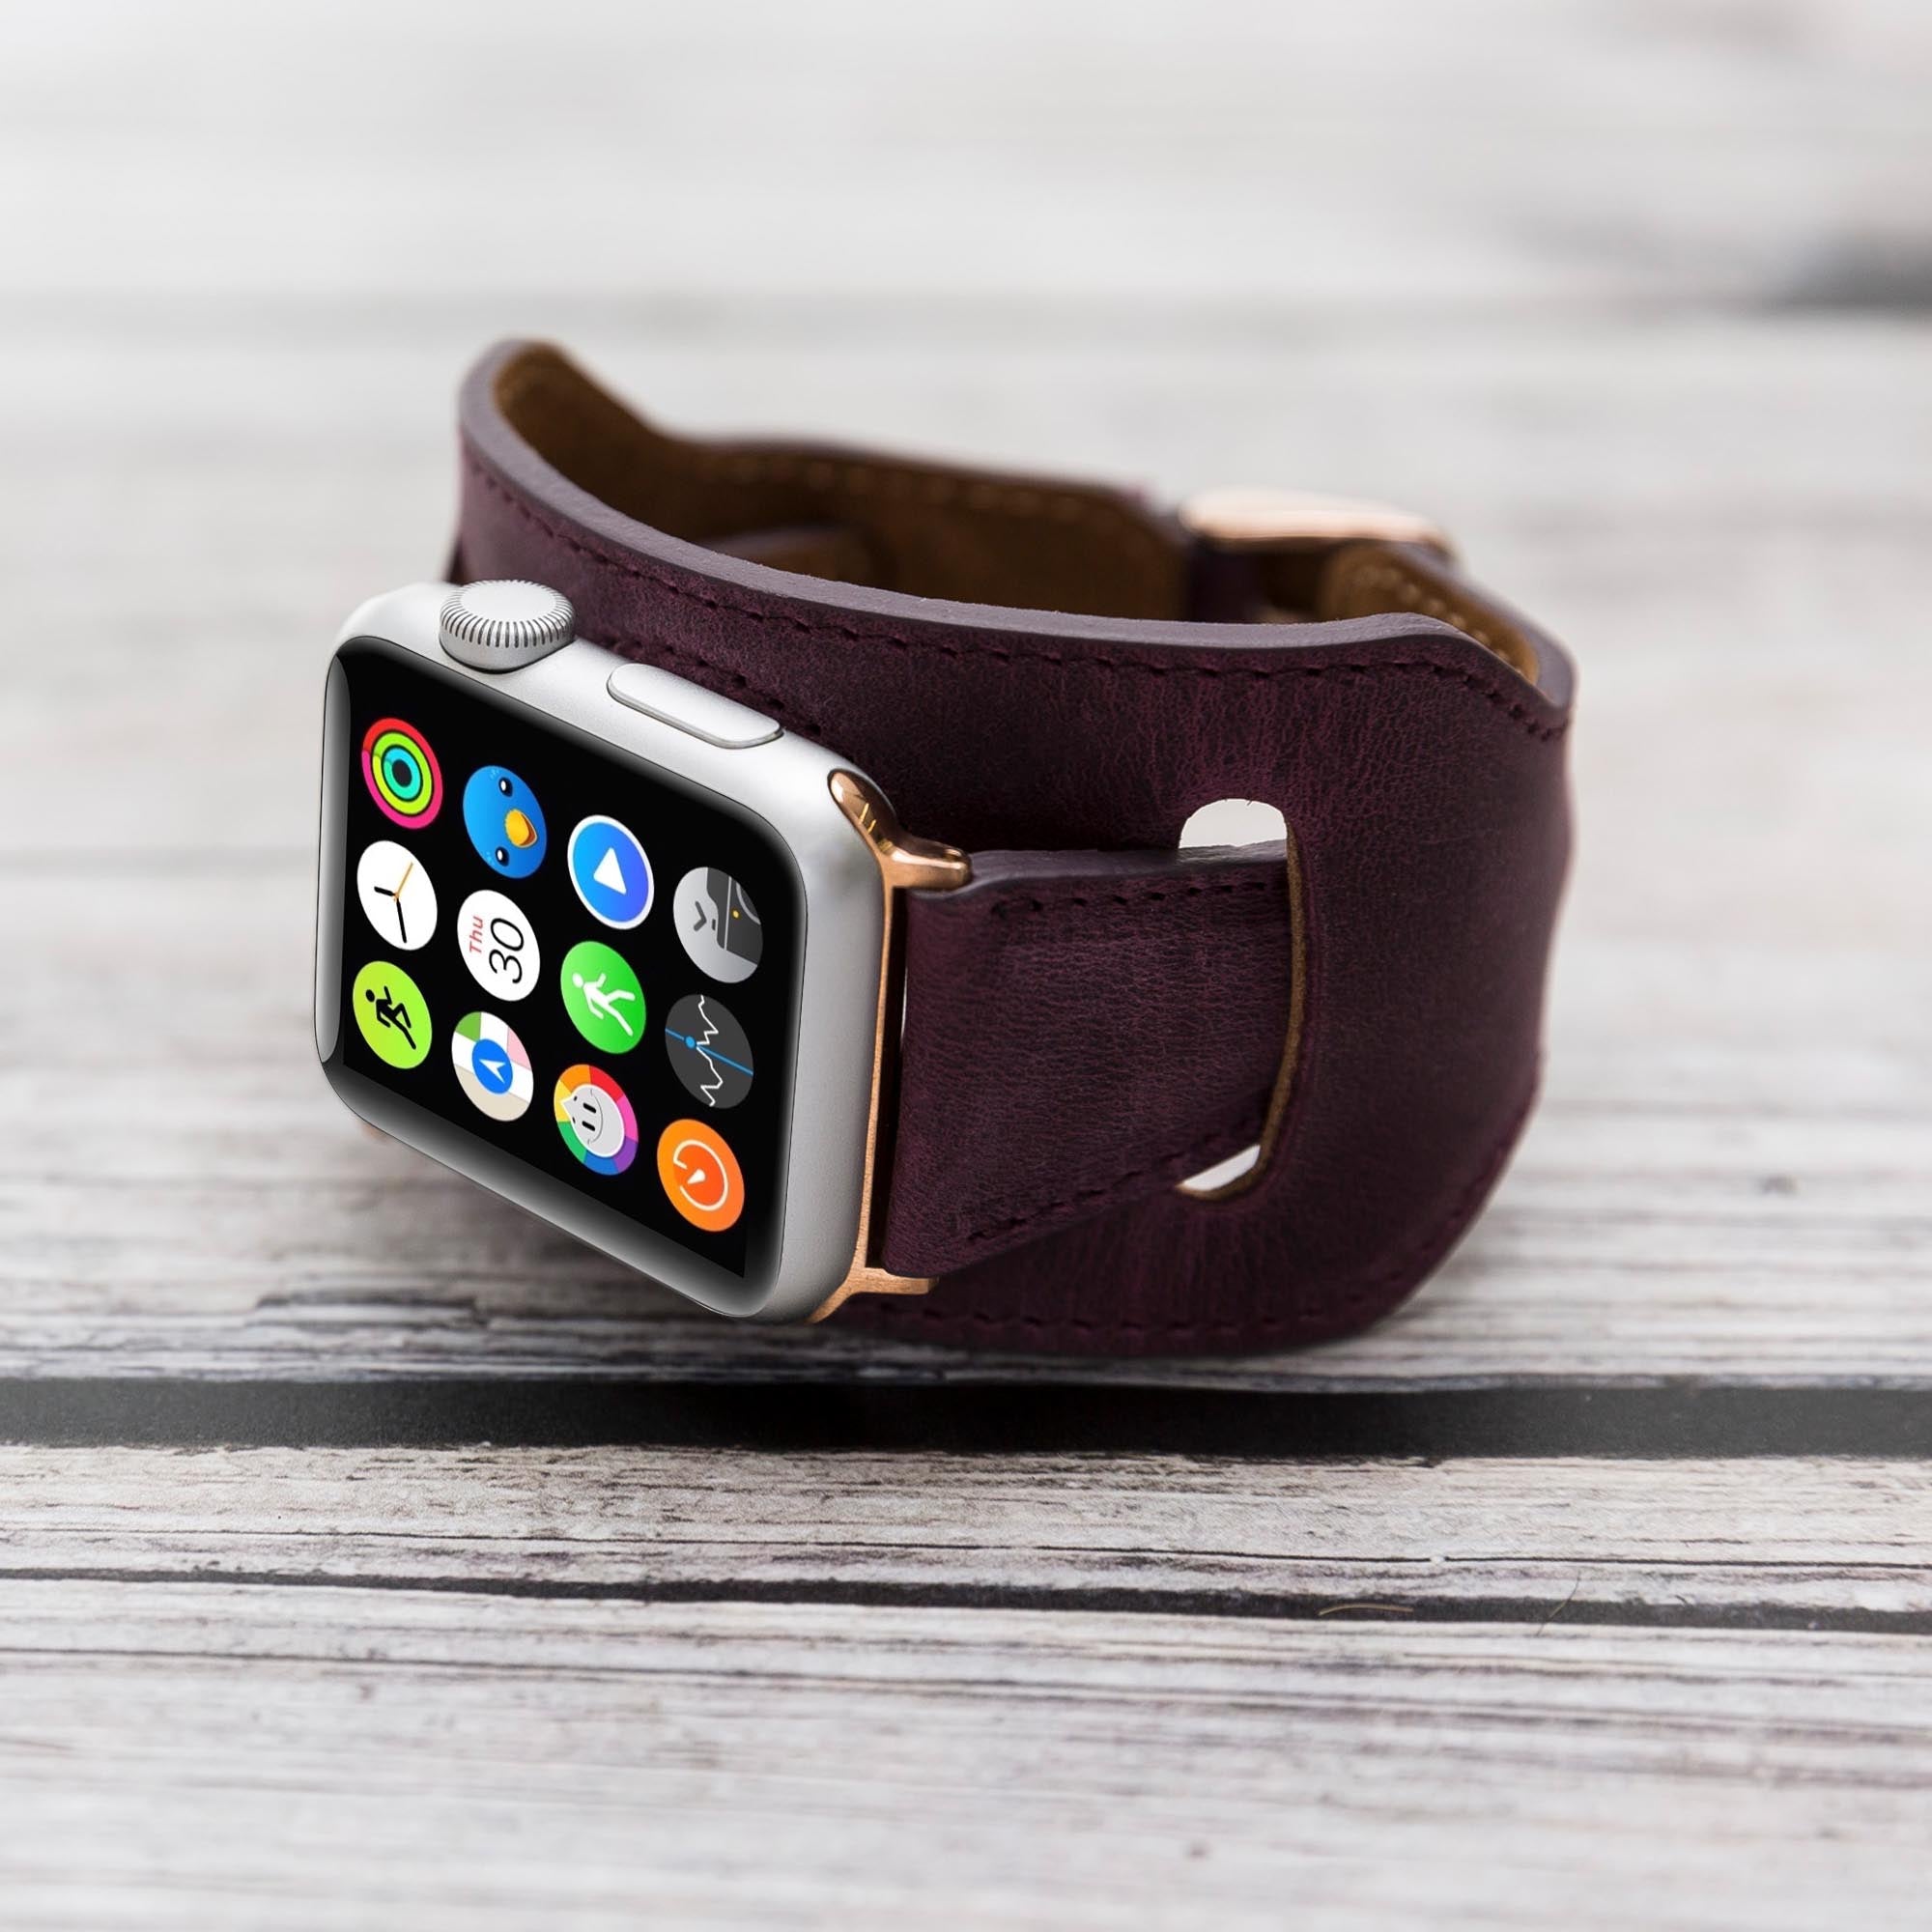 Cuff Slim Strap: Full Grain Leather Band for Apple Watch 38mm / 40mm - PURPLE - saracleather